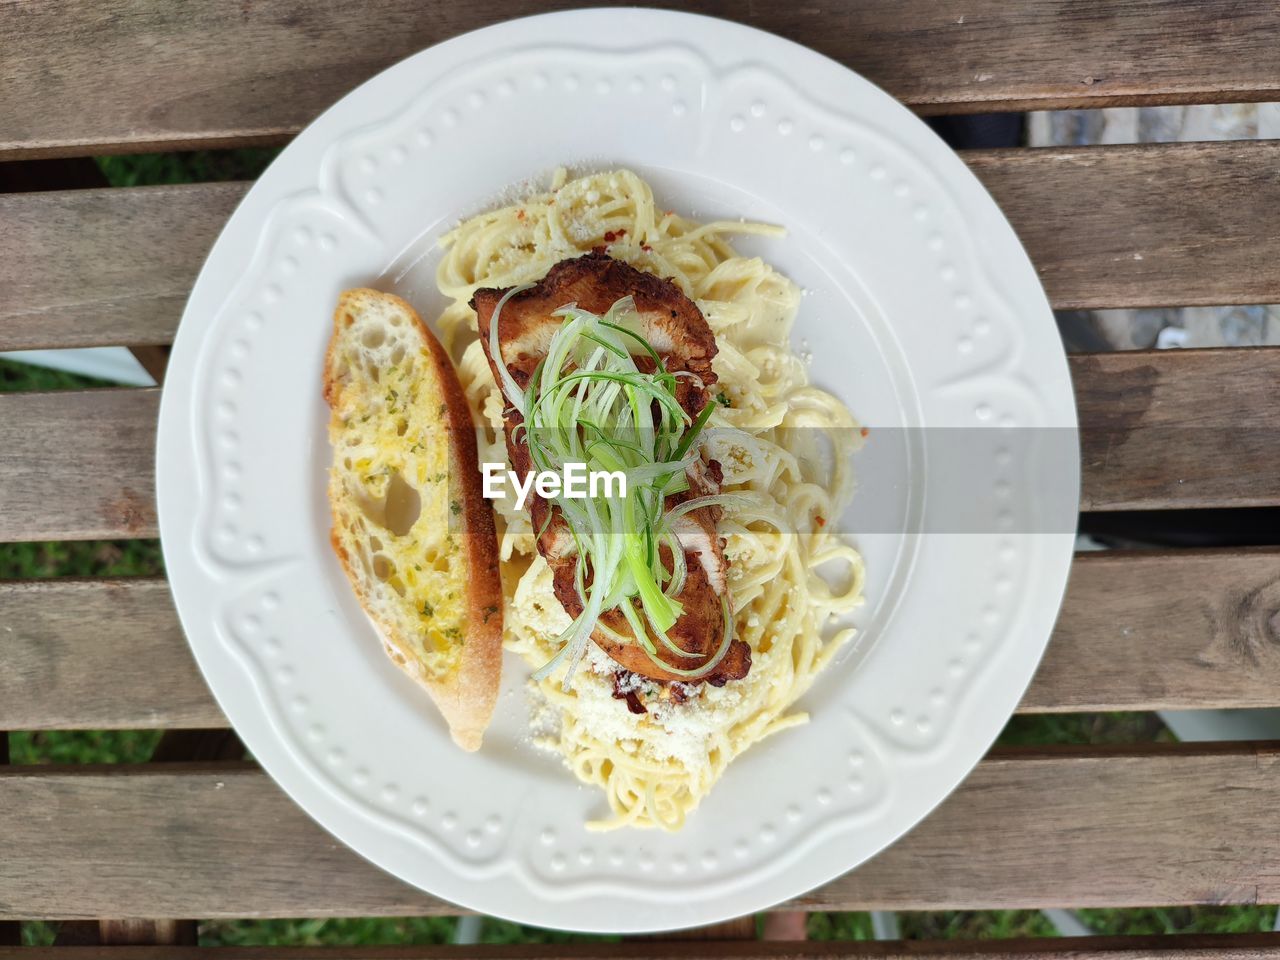 food and drink, food, wood, freshness, spaghetti, healthy eating, plate, italian food, pasta, wellbeing, dish, table, high angle view, no people, cuisine, vegetable, produce, directly above, fast food, meal, indoors, still life, garnish, carbonara, cheese, fork, serving size